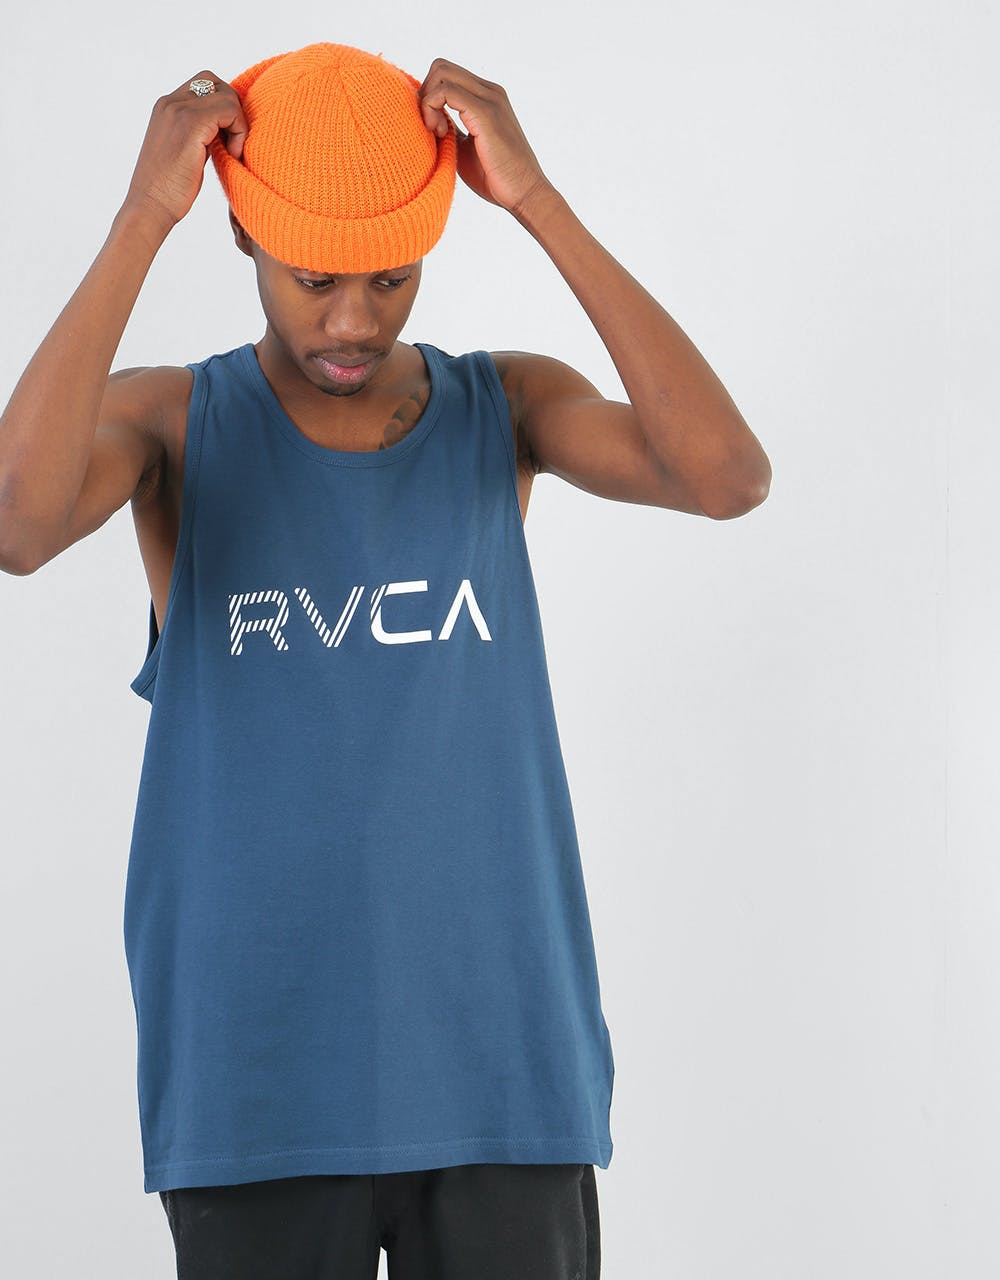 RVCA Blinded Tank - Seattle Blue